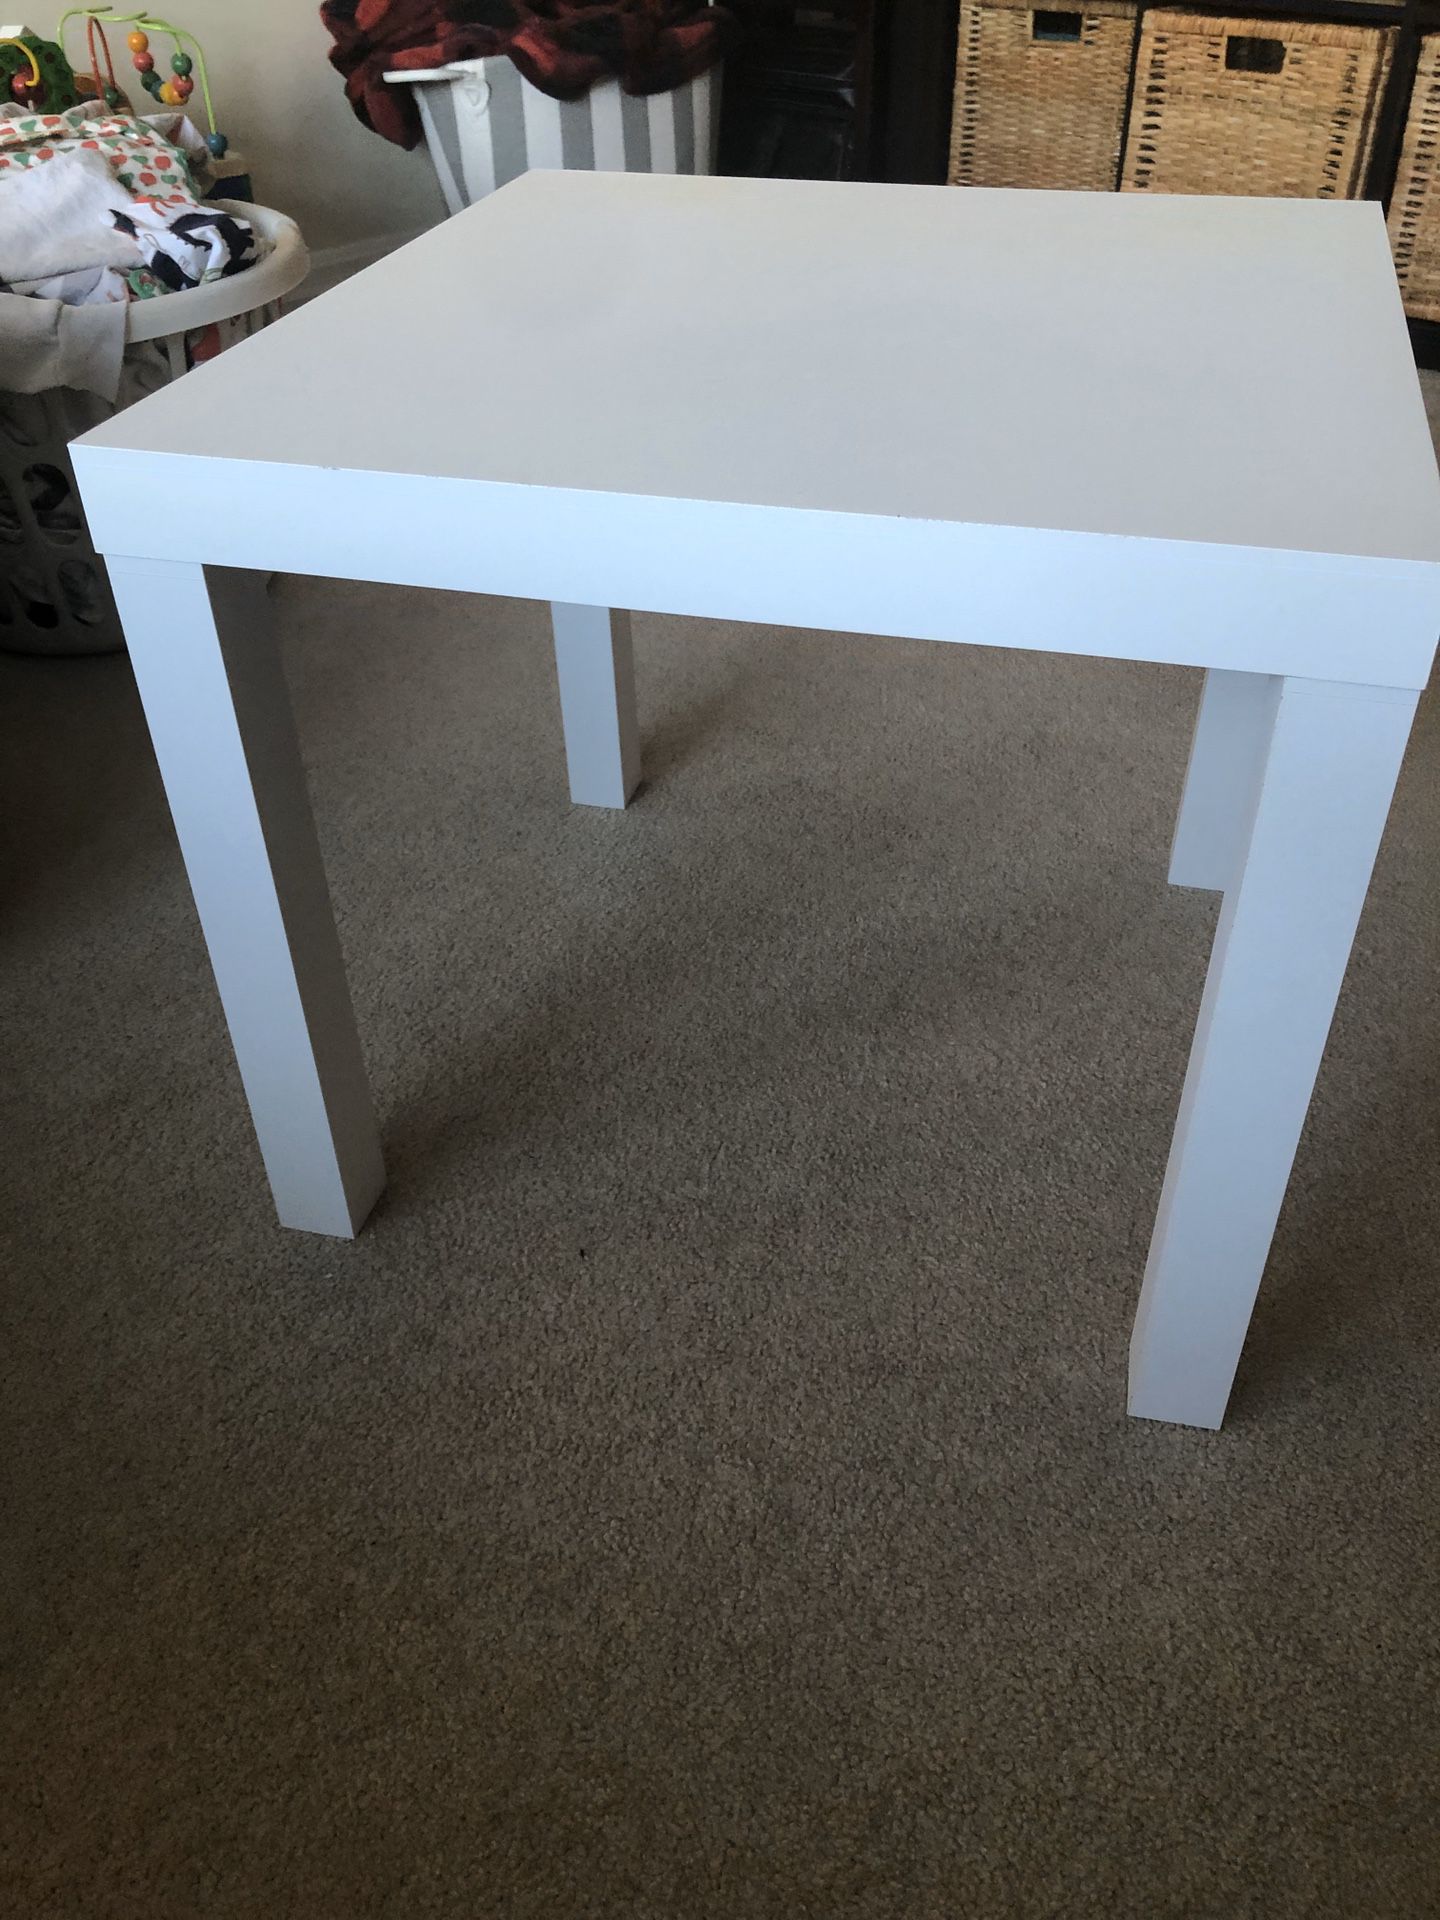 Small white table